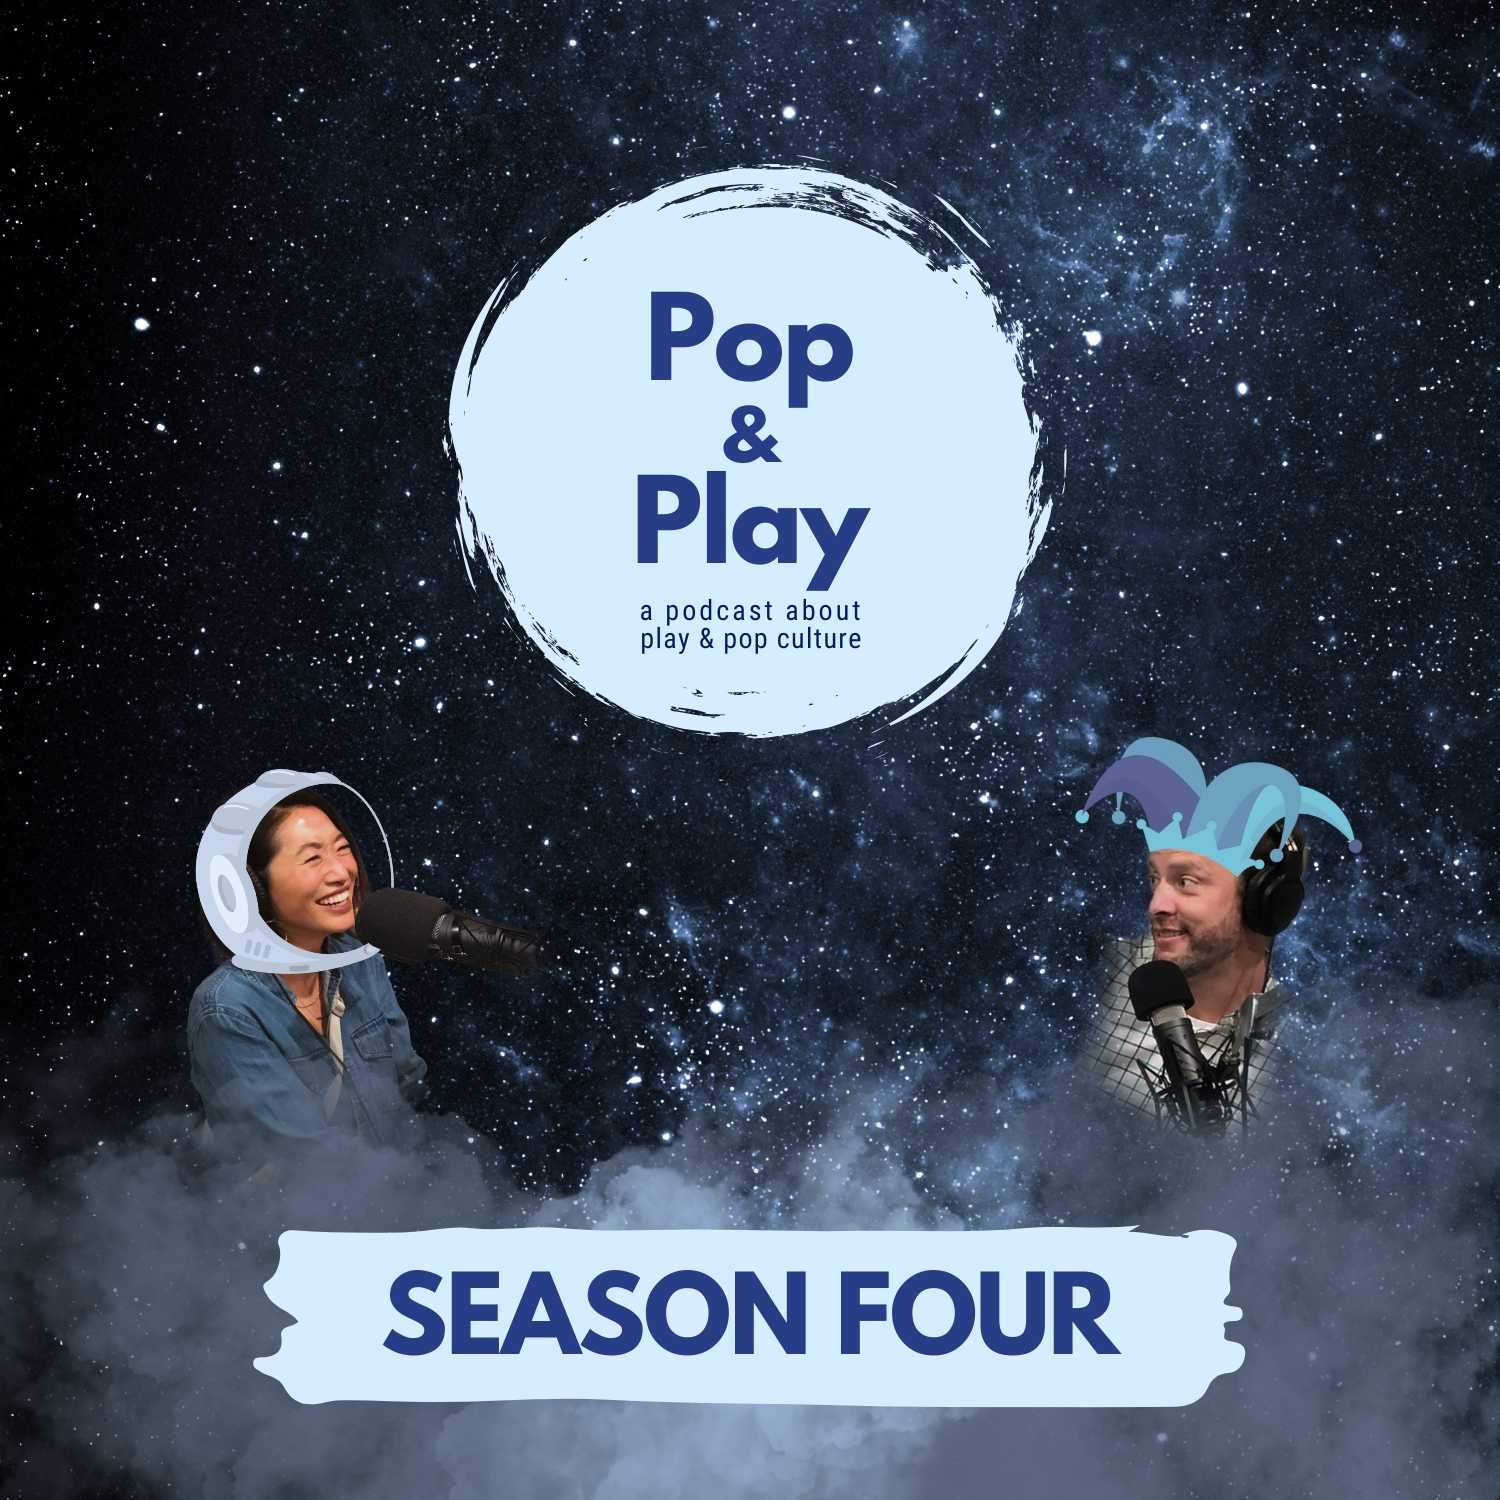 Haeny and Nathan, the podcast hosts, photoshopped into outer space background with pop and play podcast logo and 